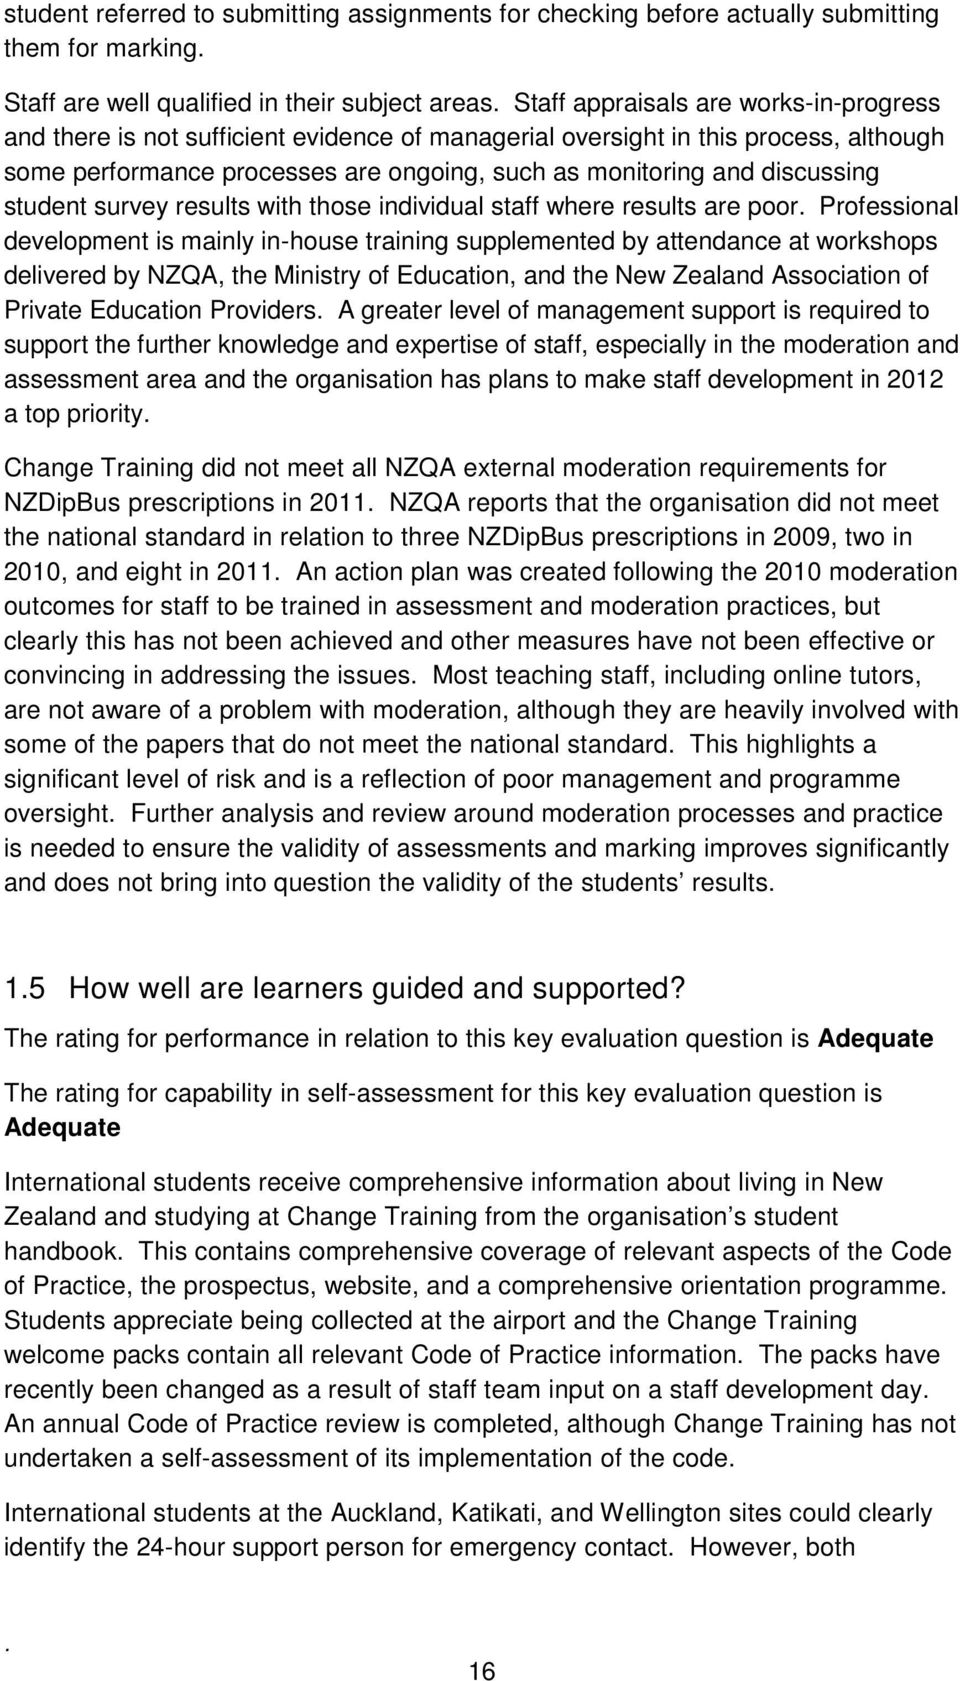 where results are poor Professional development is mainly in-house training supplemented by attendance at workshops delivered by NZQA, the Ministry of Education, and the New Zealand Association of